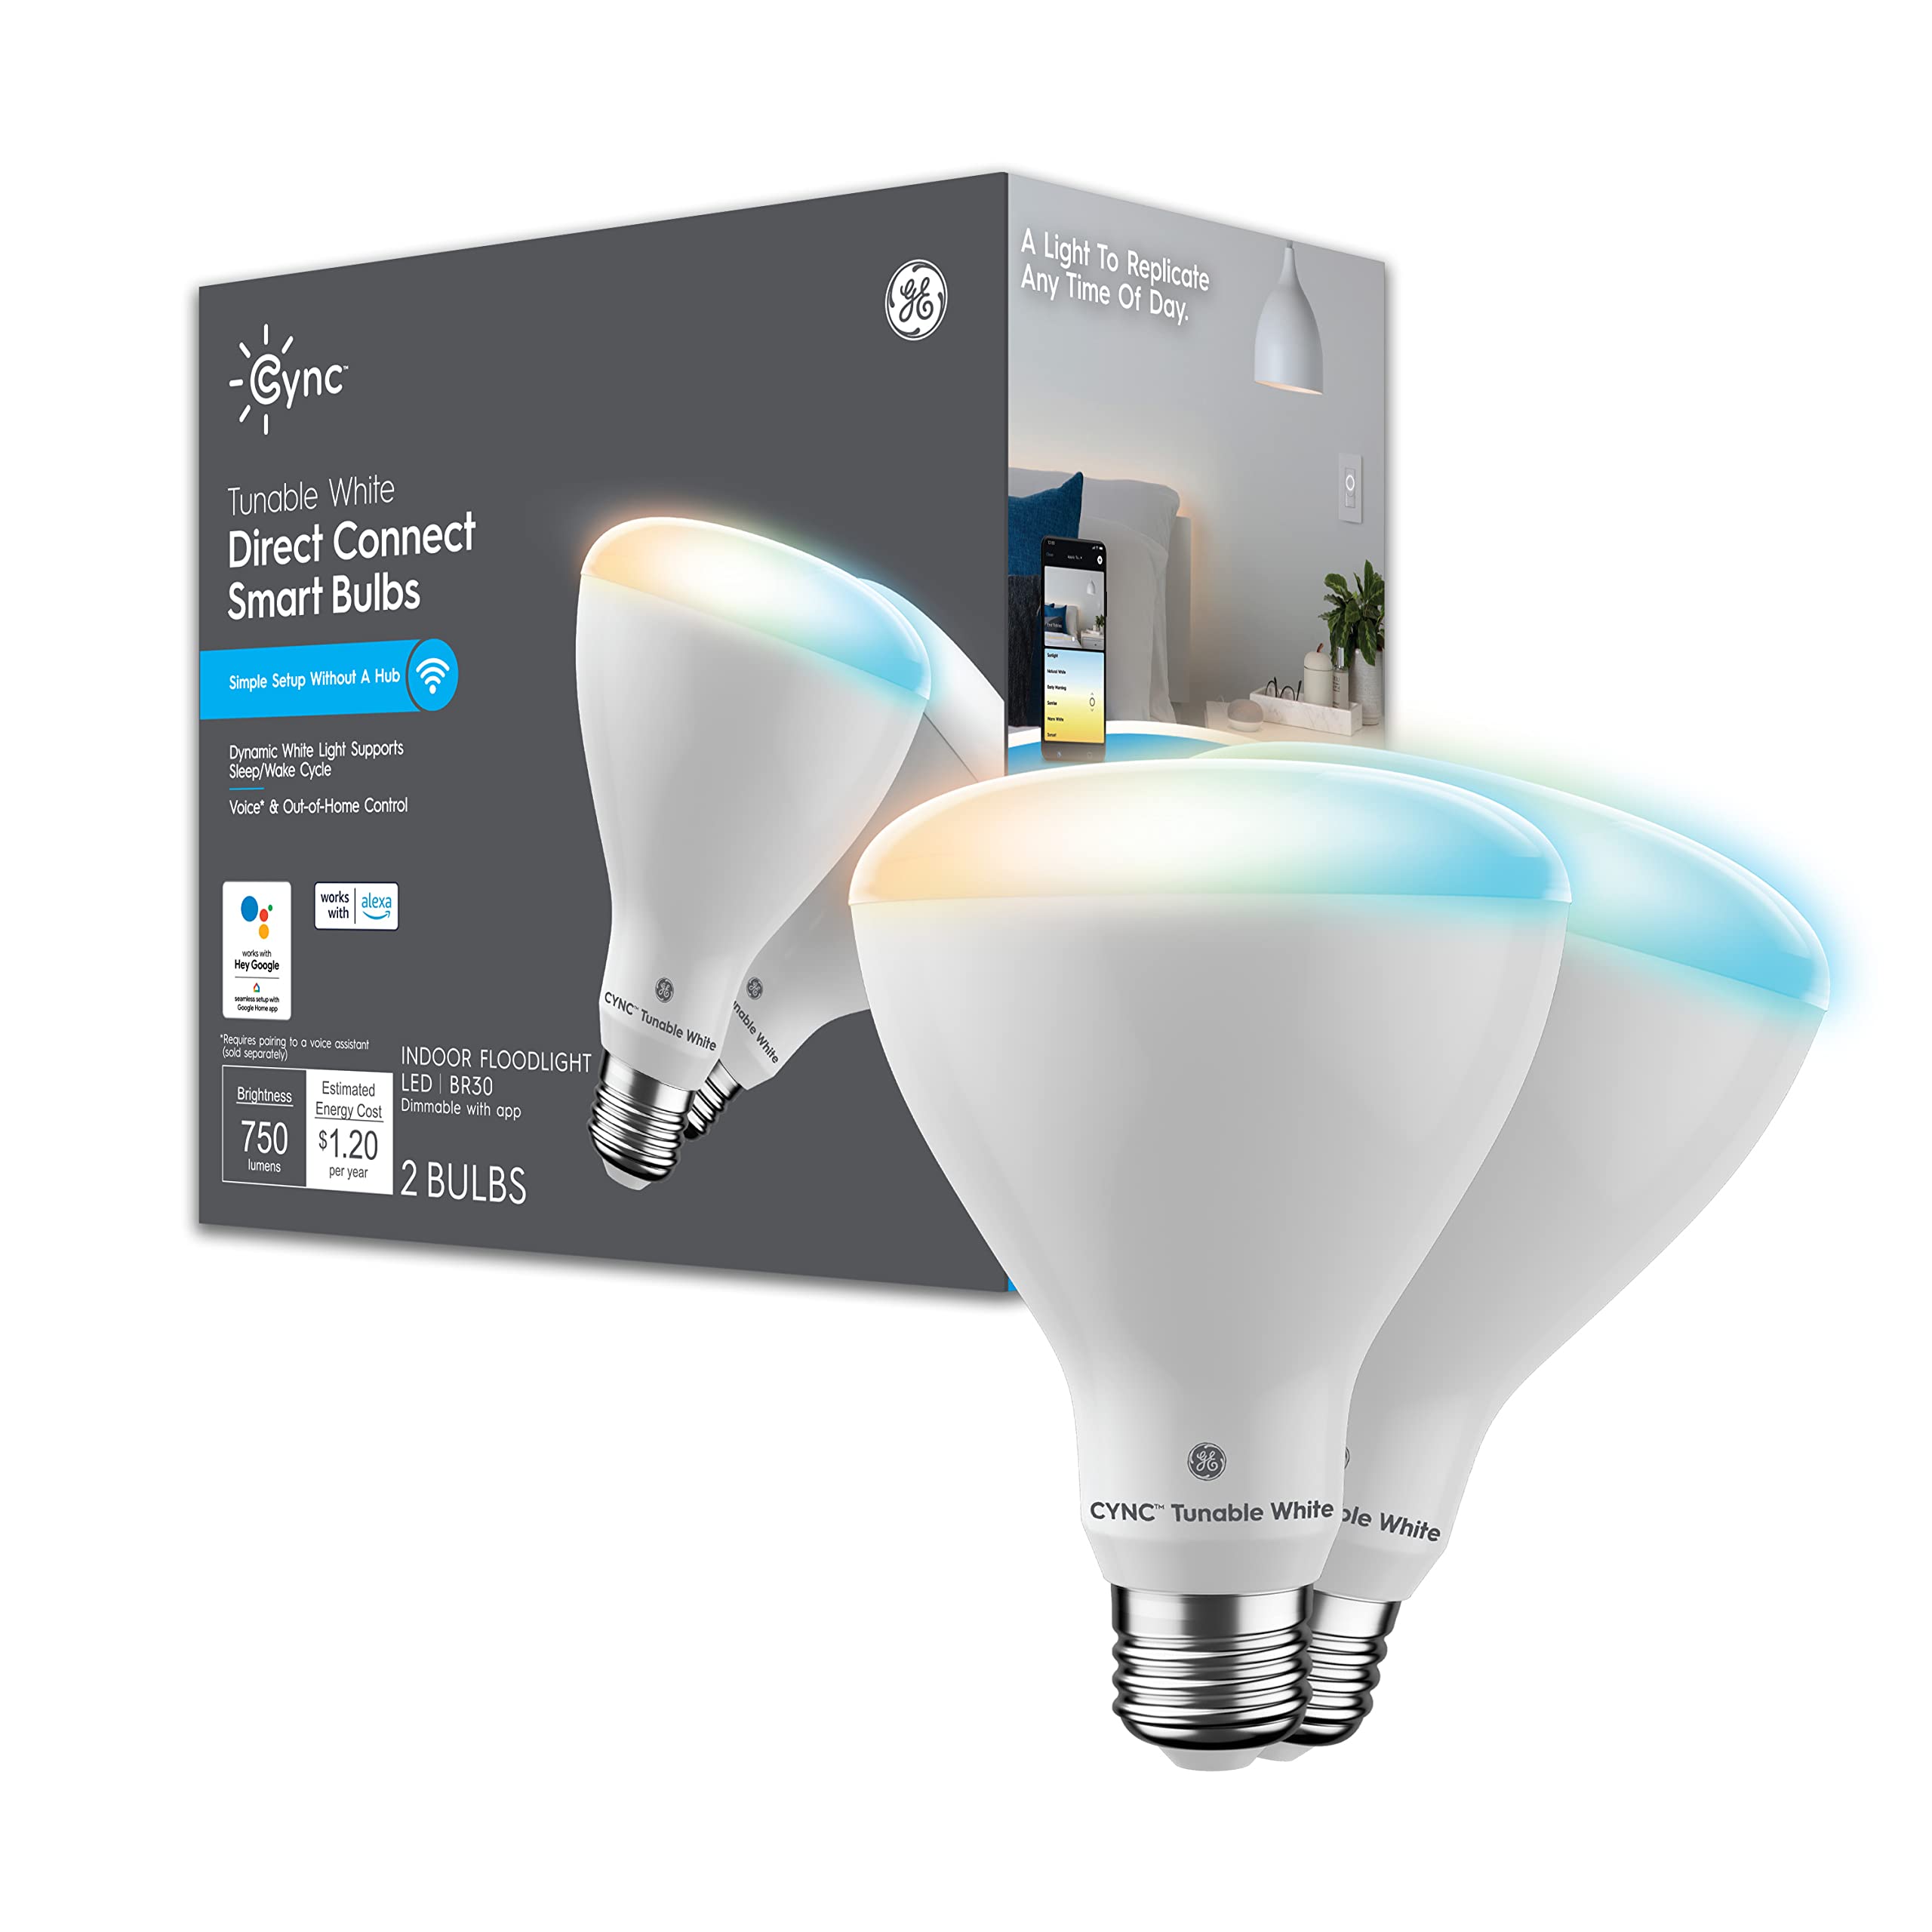 GE Lighting CYNC Smart LED Light Bulbs, White Tones, Bluetooth and Wi-Fi Lights, Works with Alexa and Google Home, BR30 Indoor Floodlight Bulbs (Pack of 2)65 watts